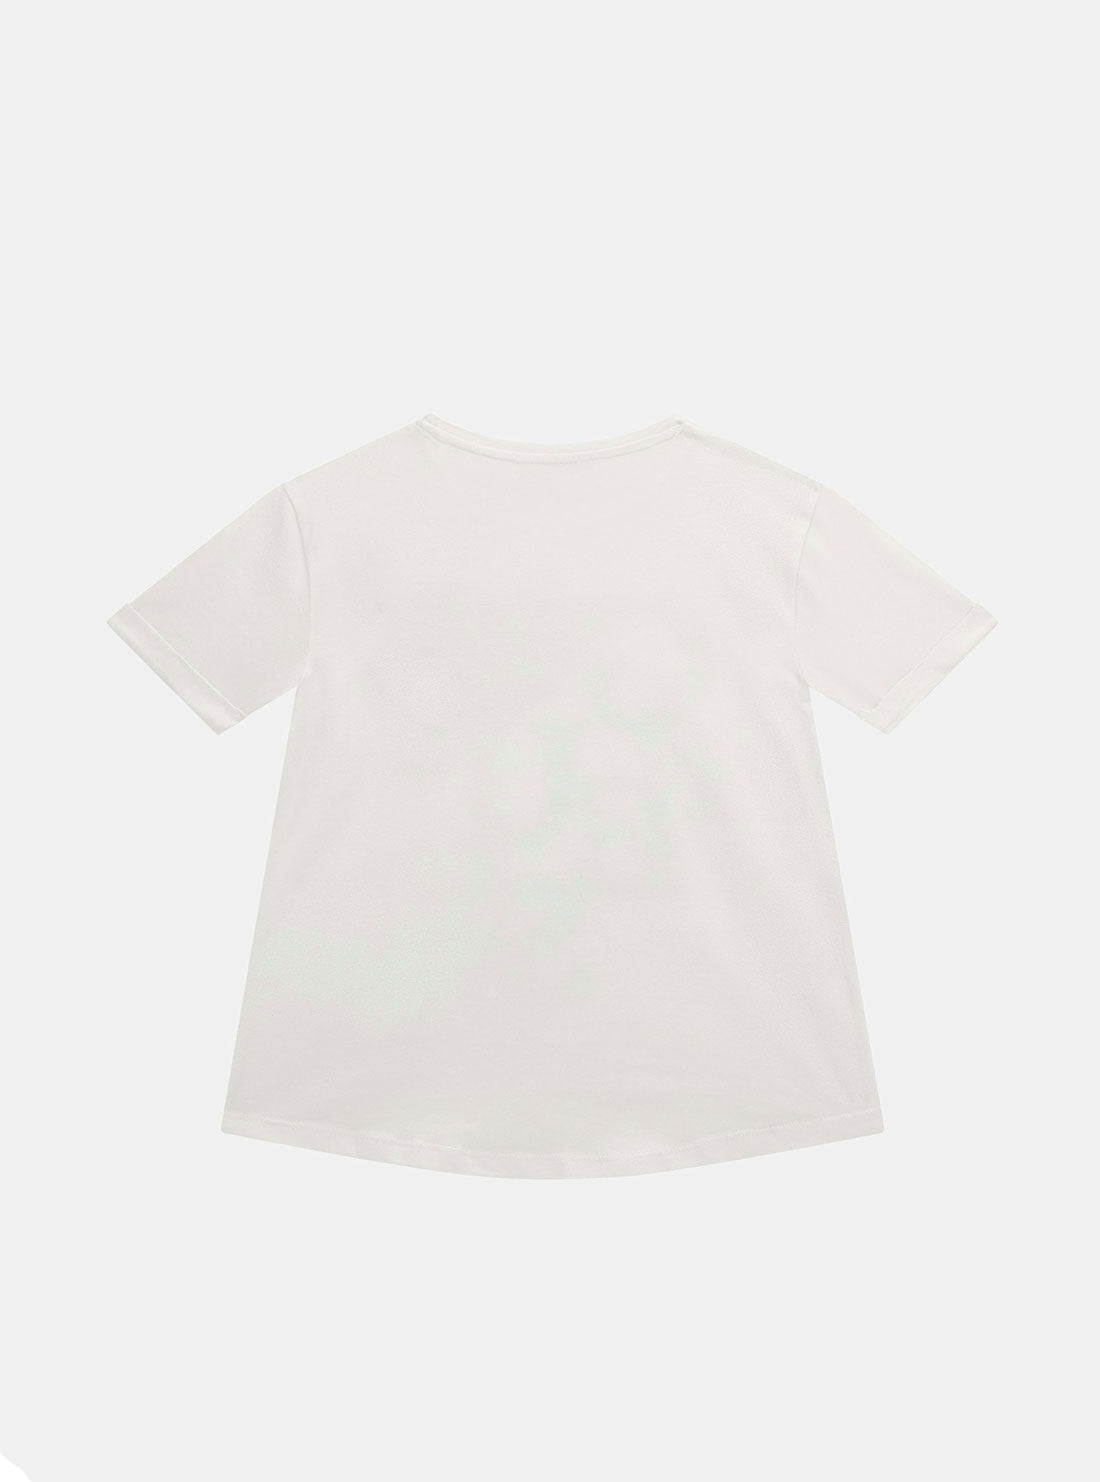 GUESS White Short Sleeve T-Shirt (7-16) back view